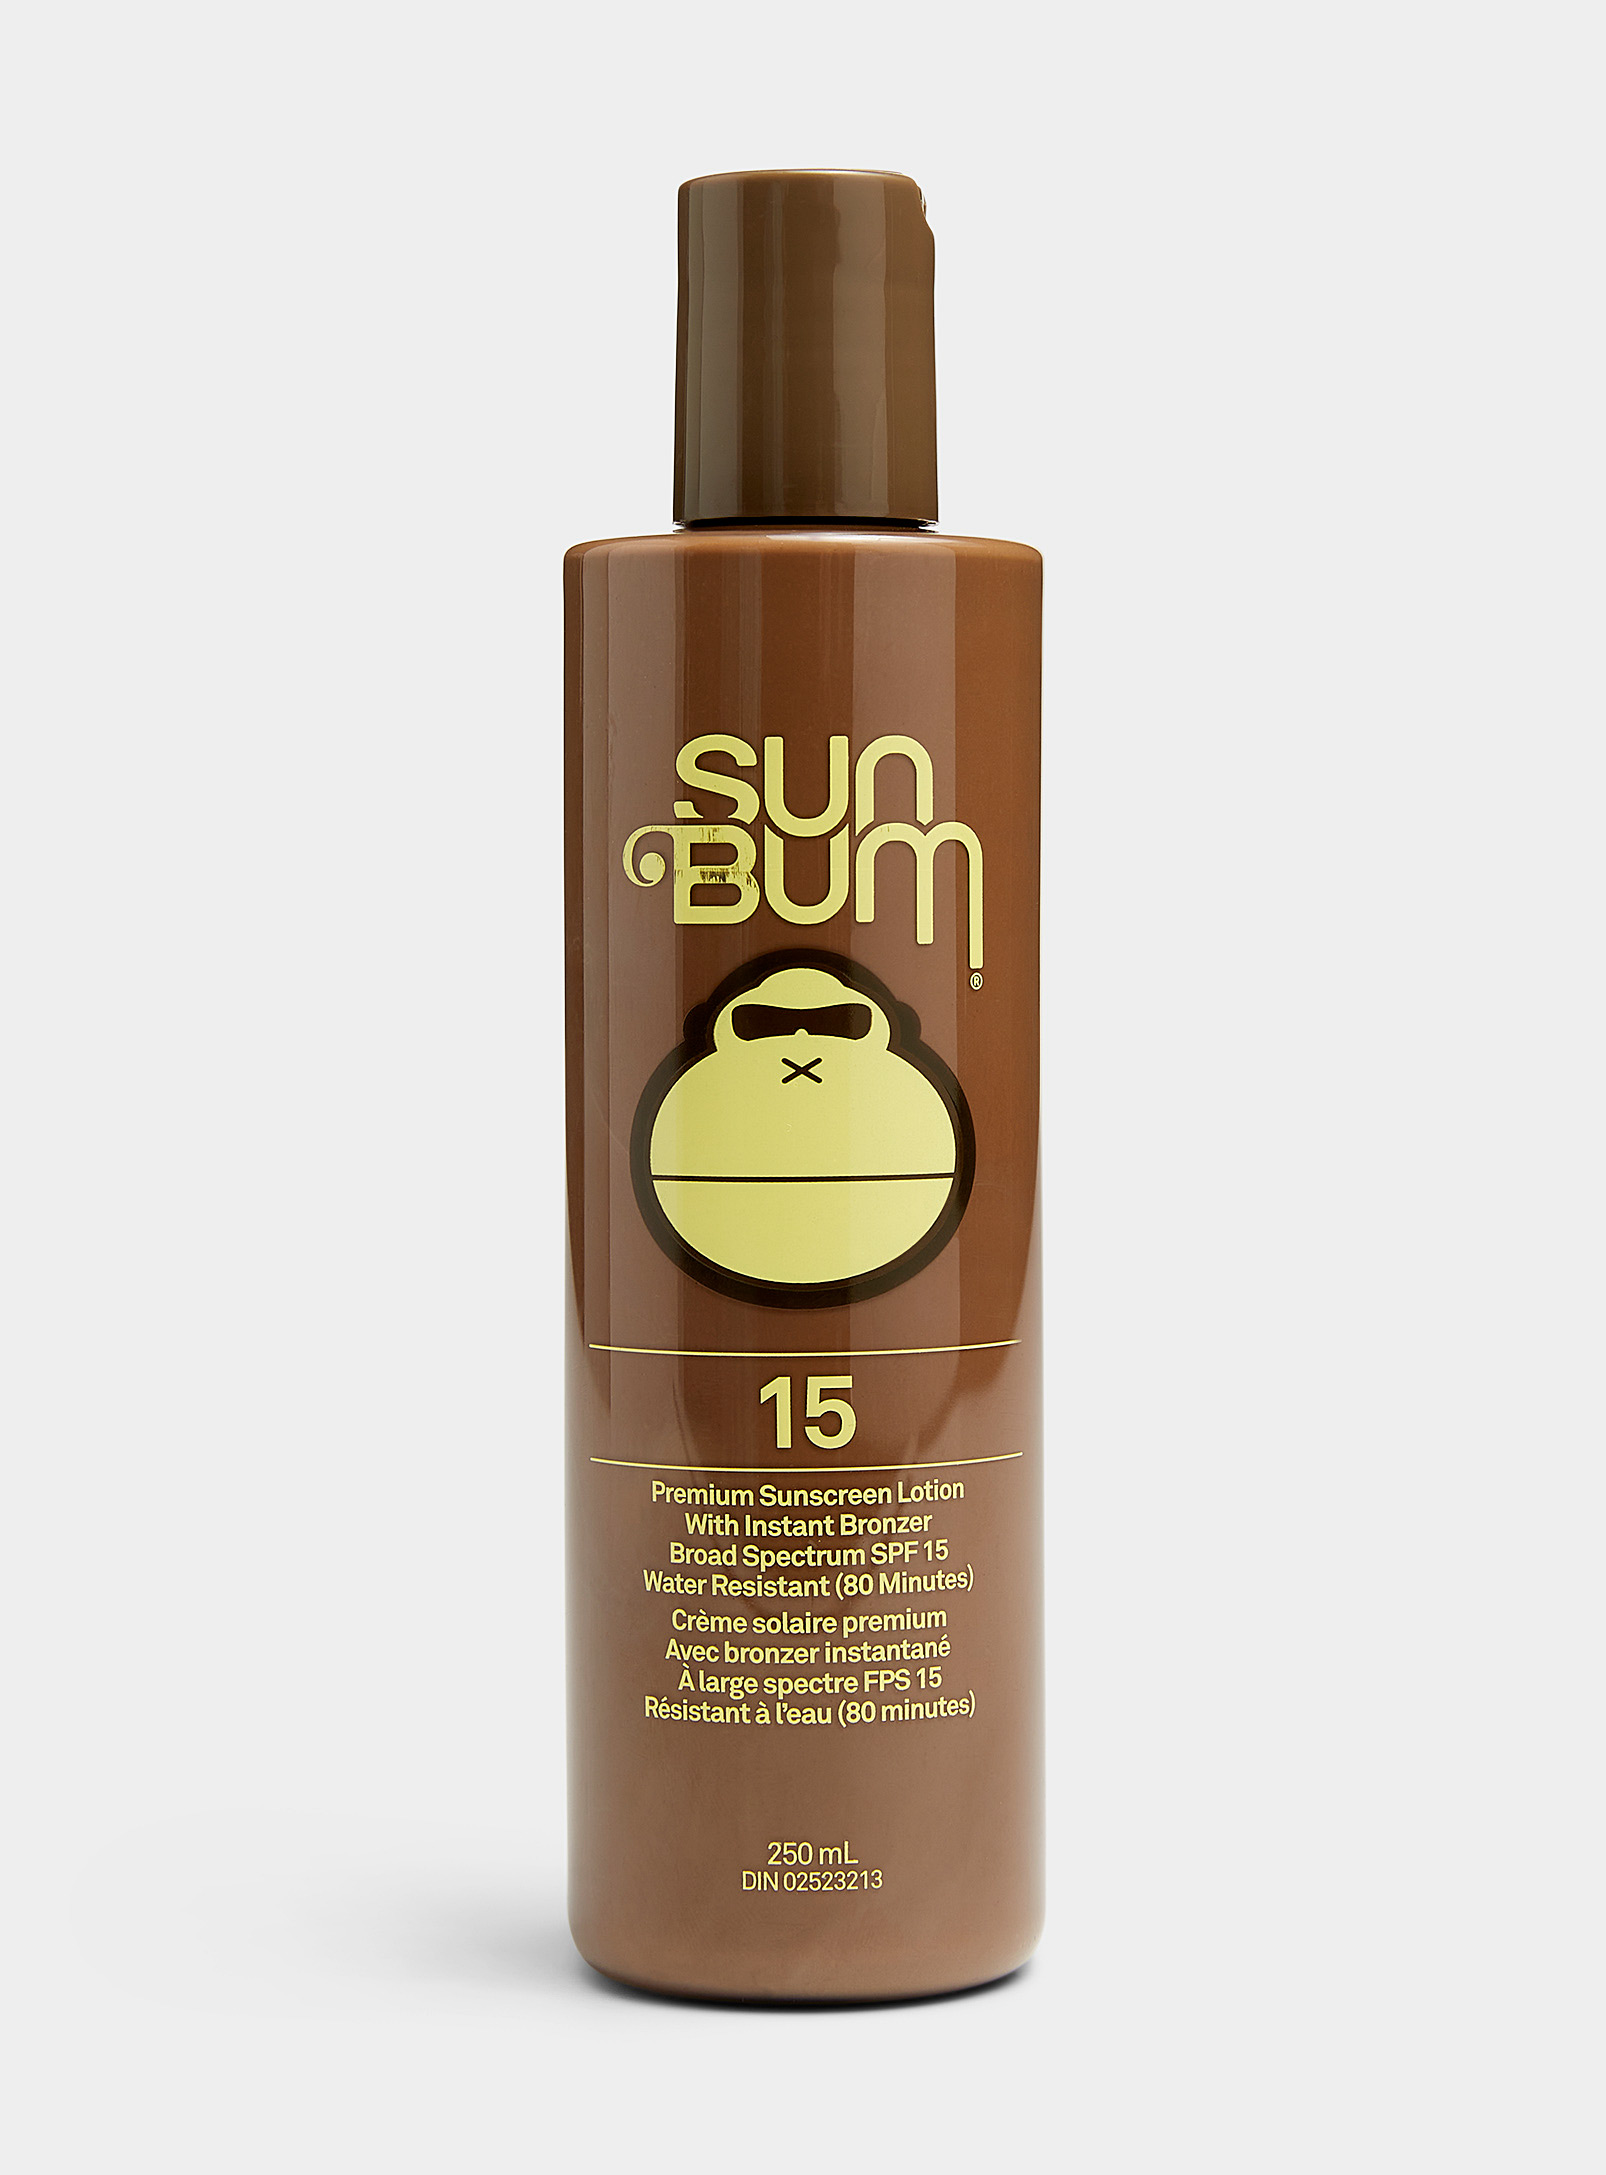 Sun Bum Spf 15 Tinted Sunscreen Lotion In Brown